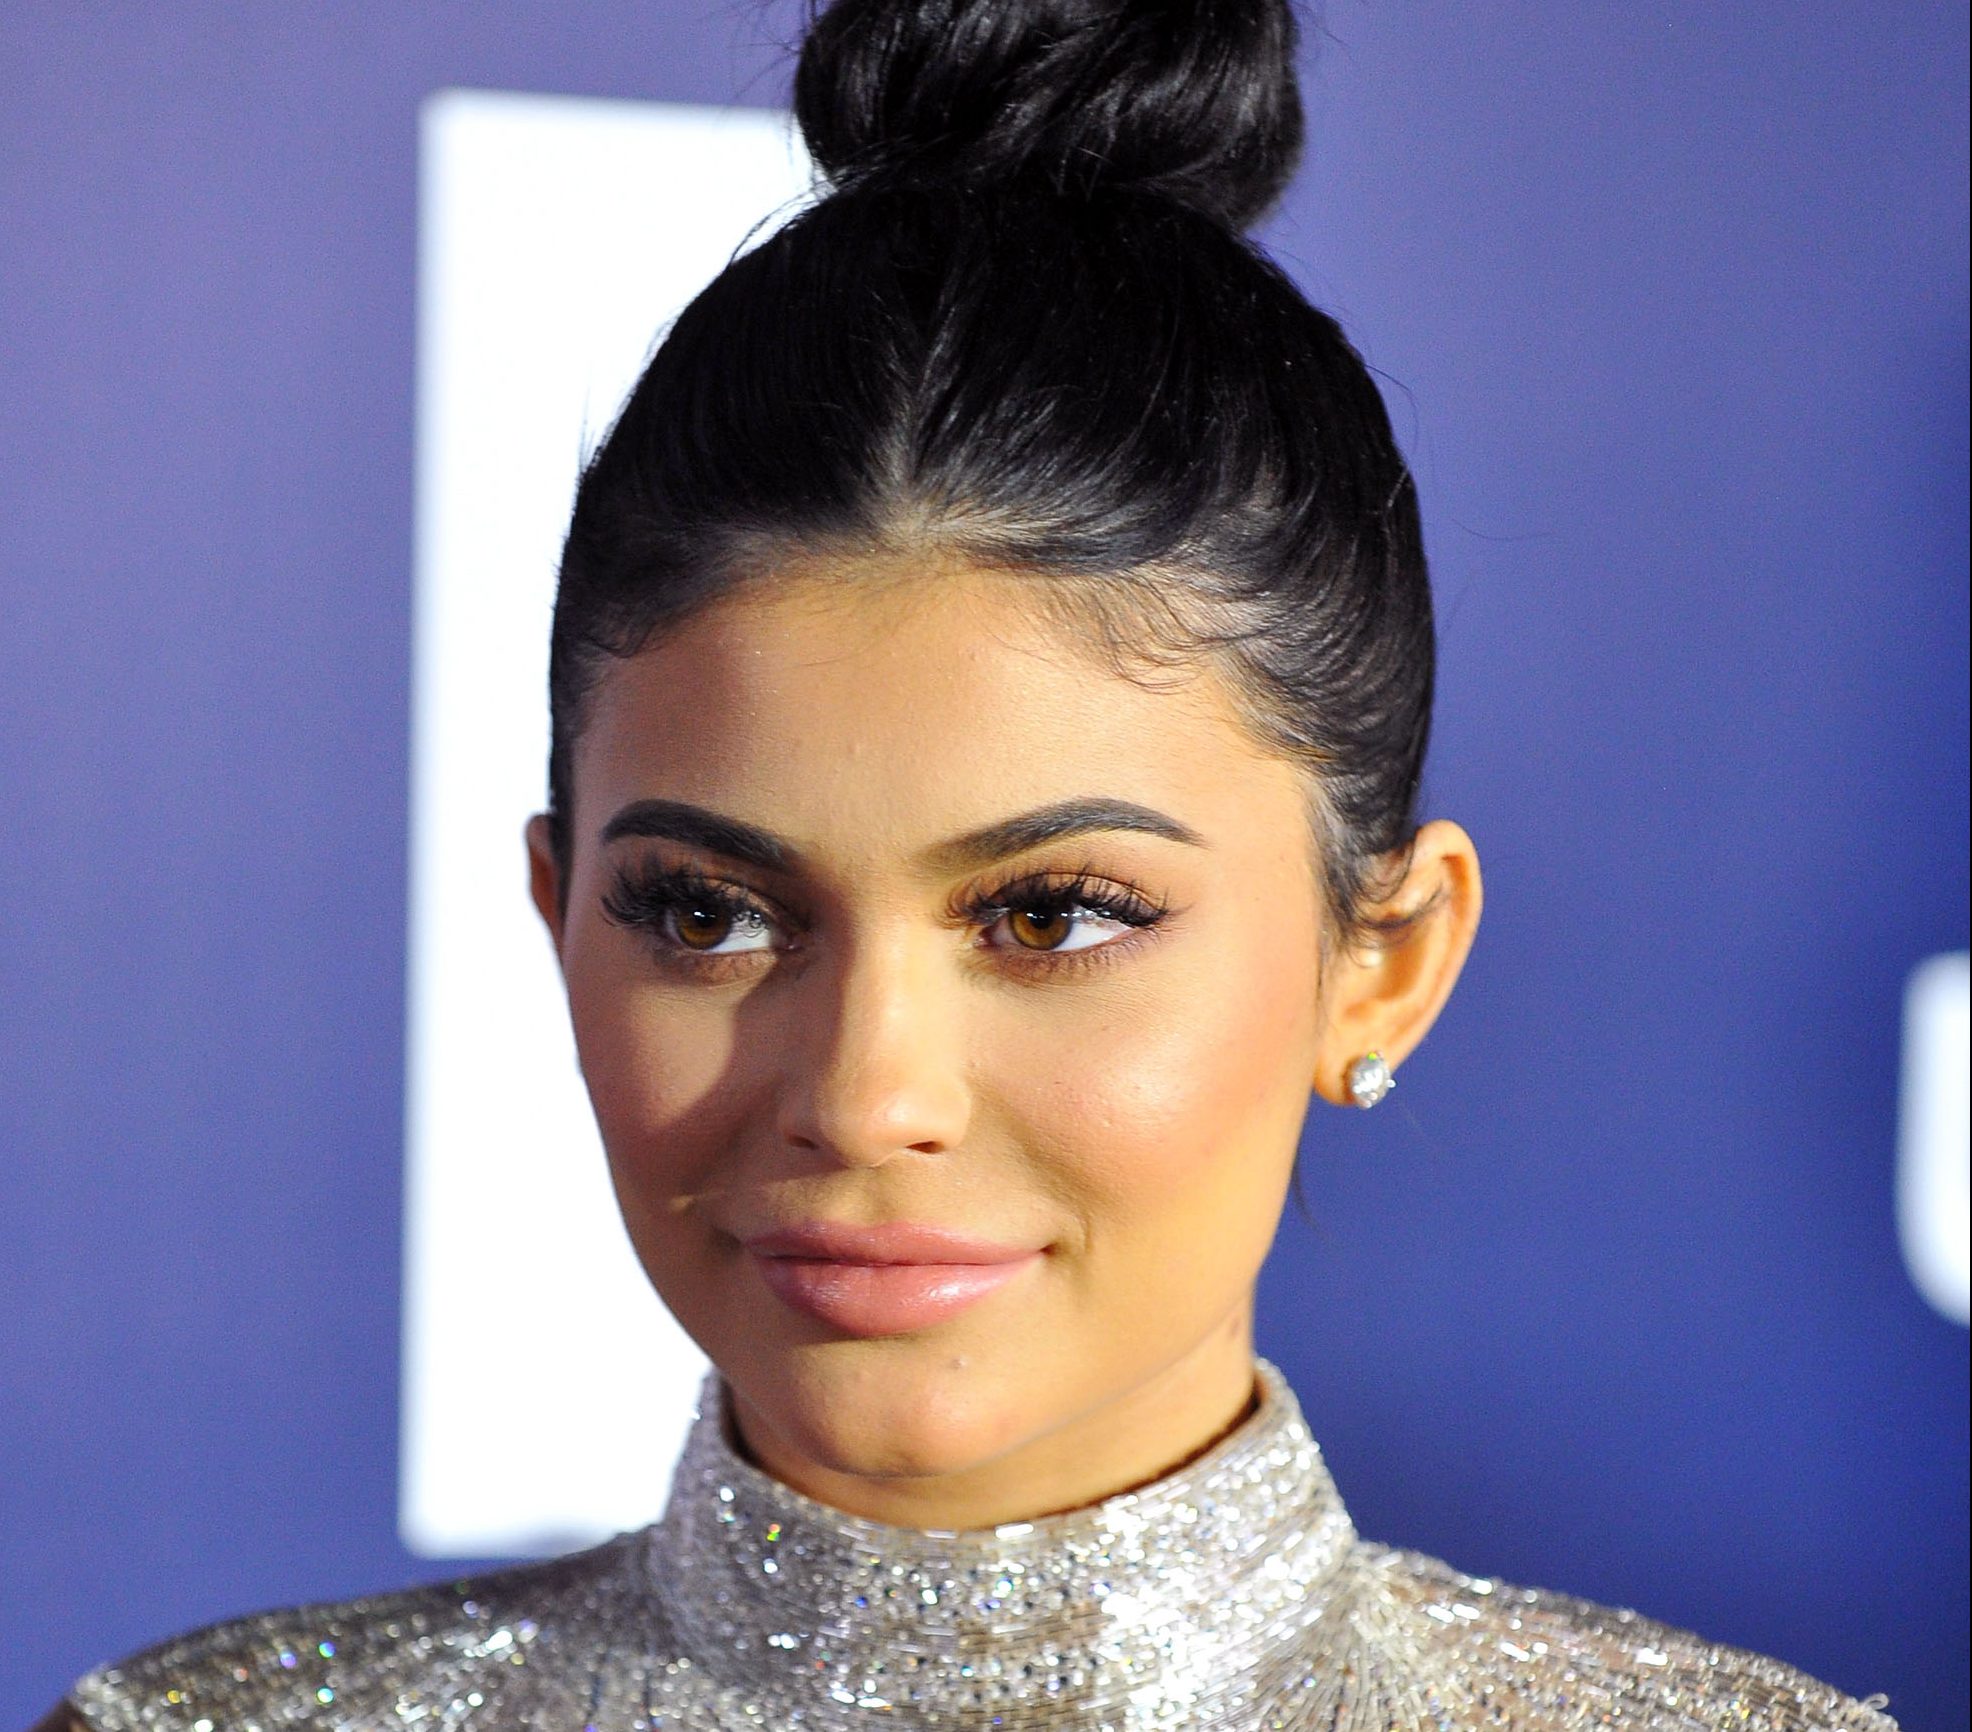 Kylie Jenner gives us a tour of her wardrobe on her website